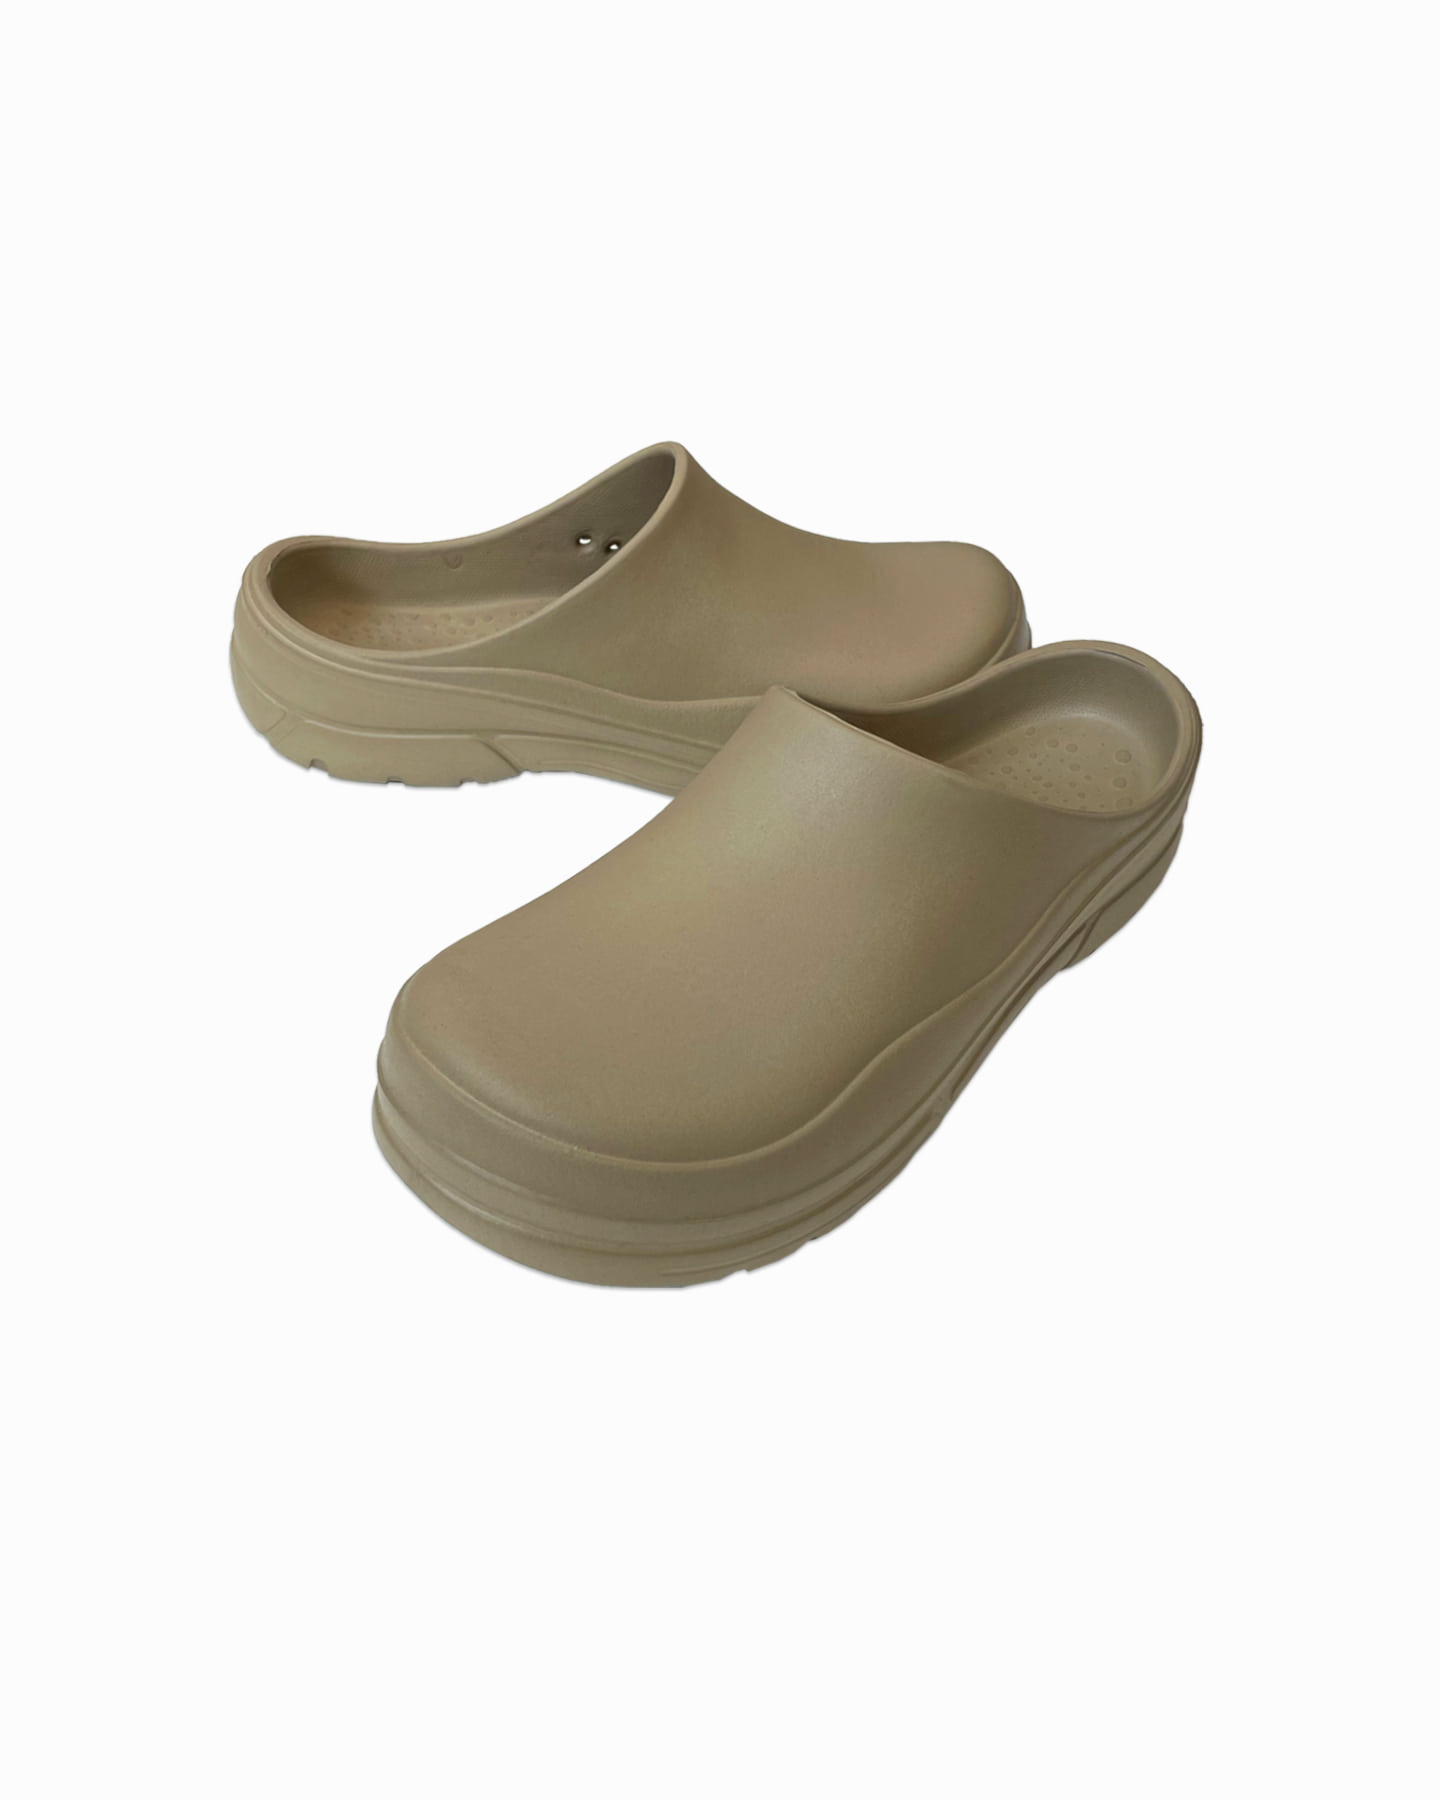 Sh rounded shape rubber clog